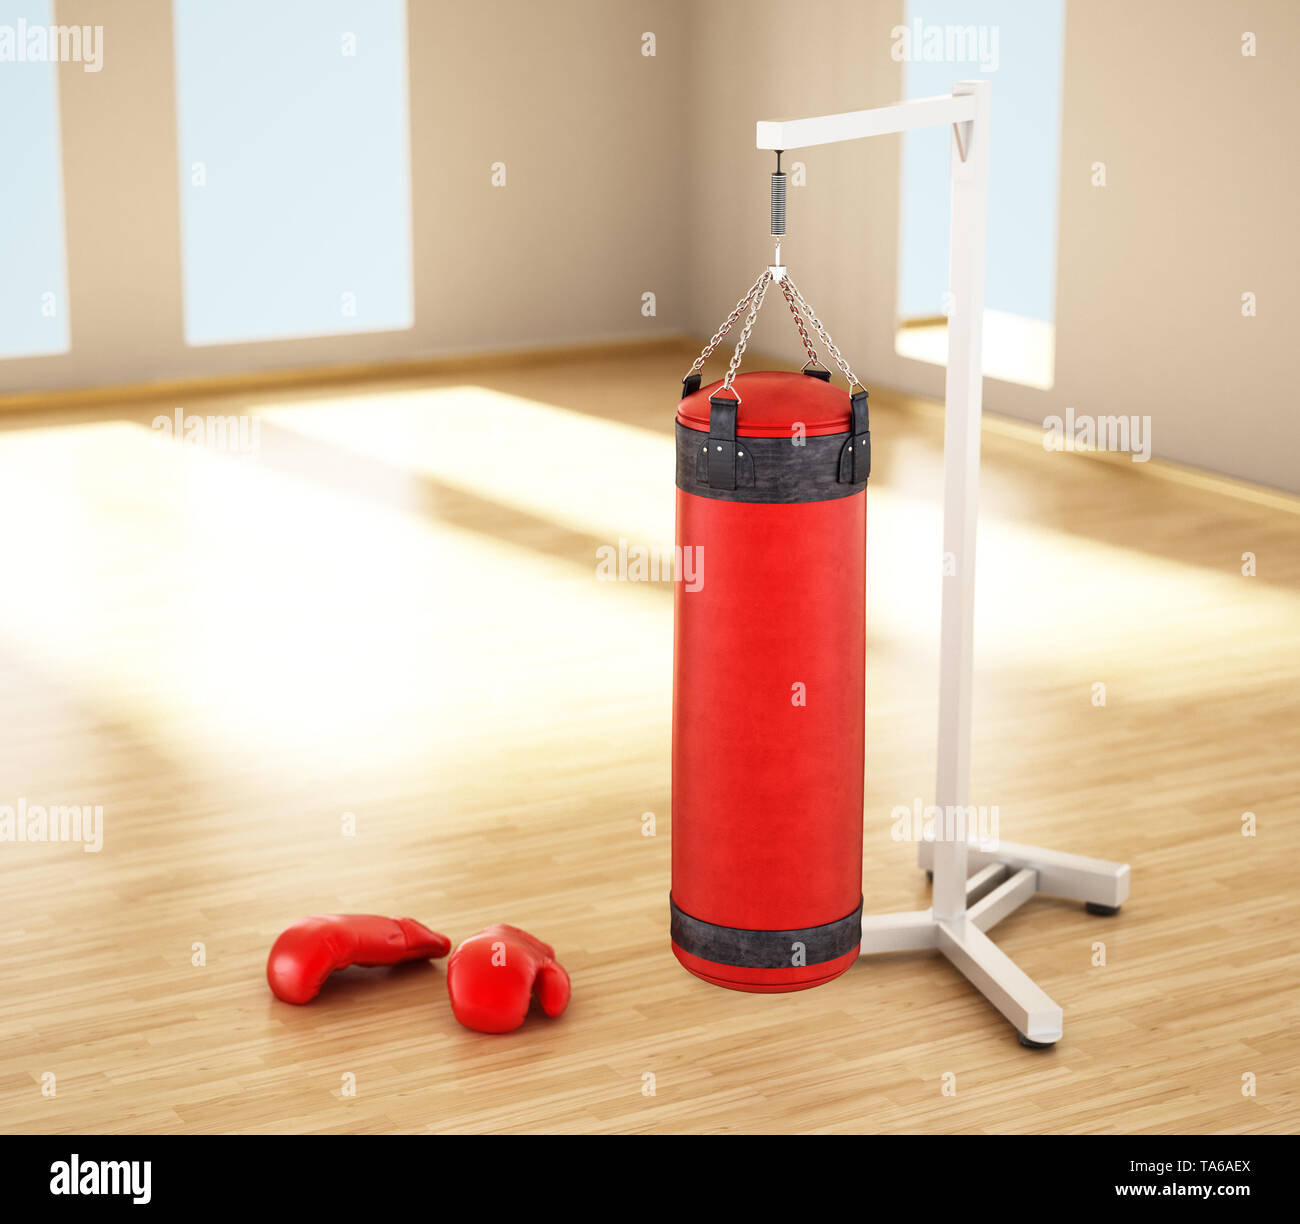 Boxing sandbag hanging on the chain inside a room. 3D illustration. Stock Photo